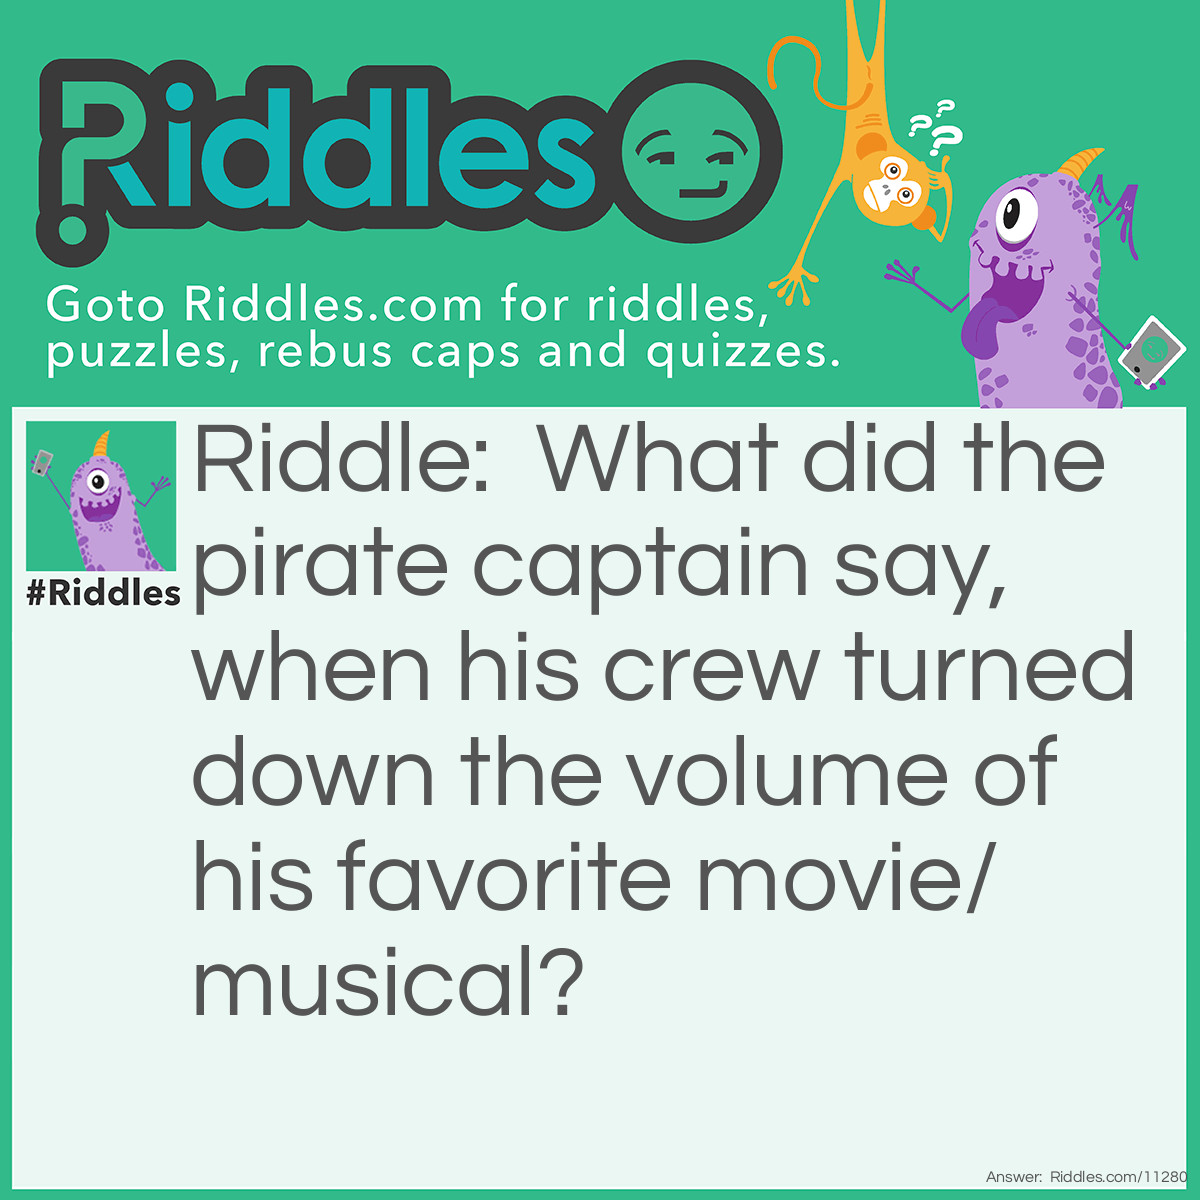 Riddle: What did the pirate captain say, when his crew turned down the volume of his favorite movie/musical? Answer: "Yaaar! This be Mute-Annie!"